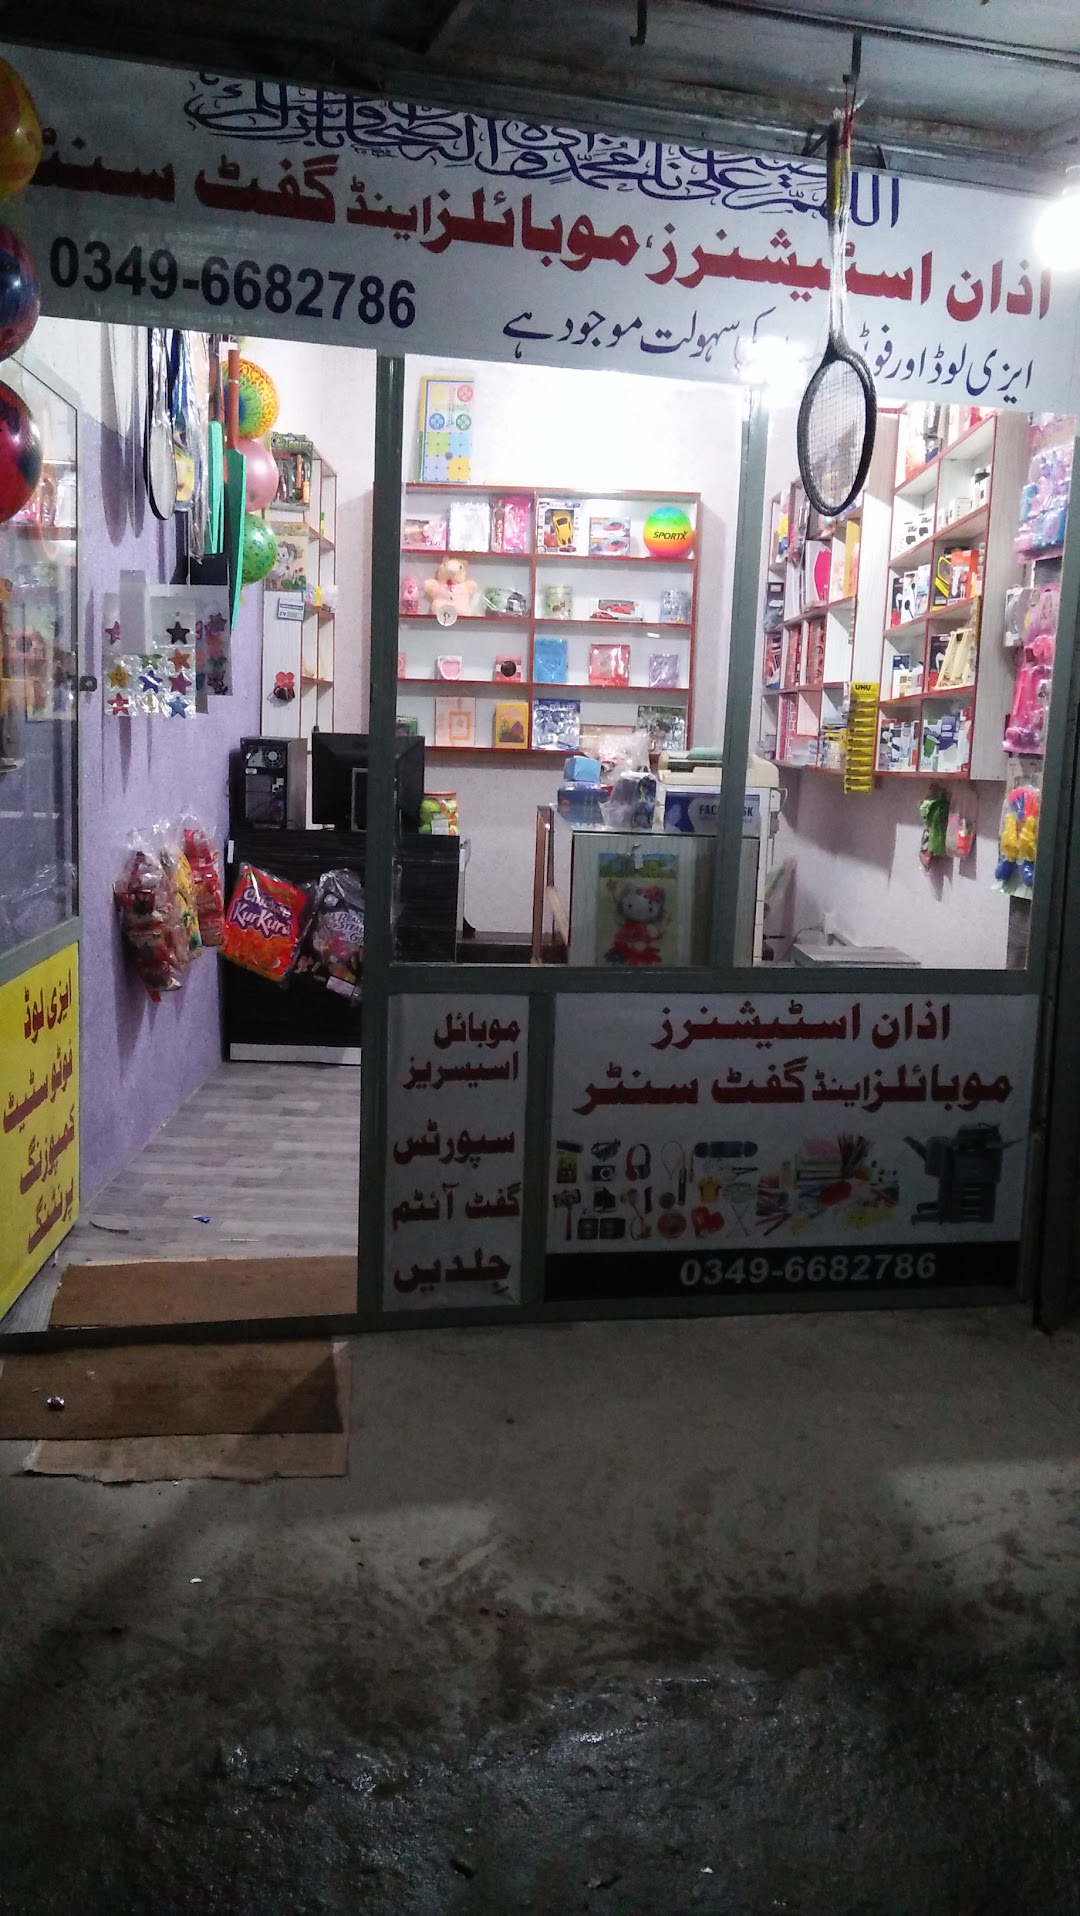 Azan Stationery, Mobiles and gift centre